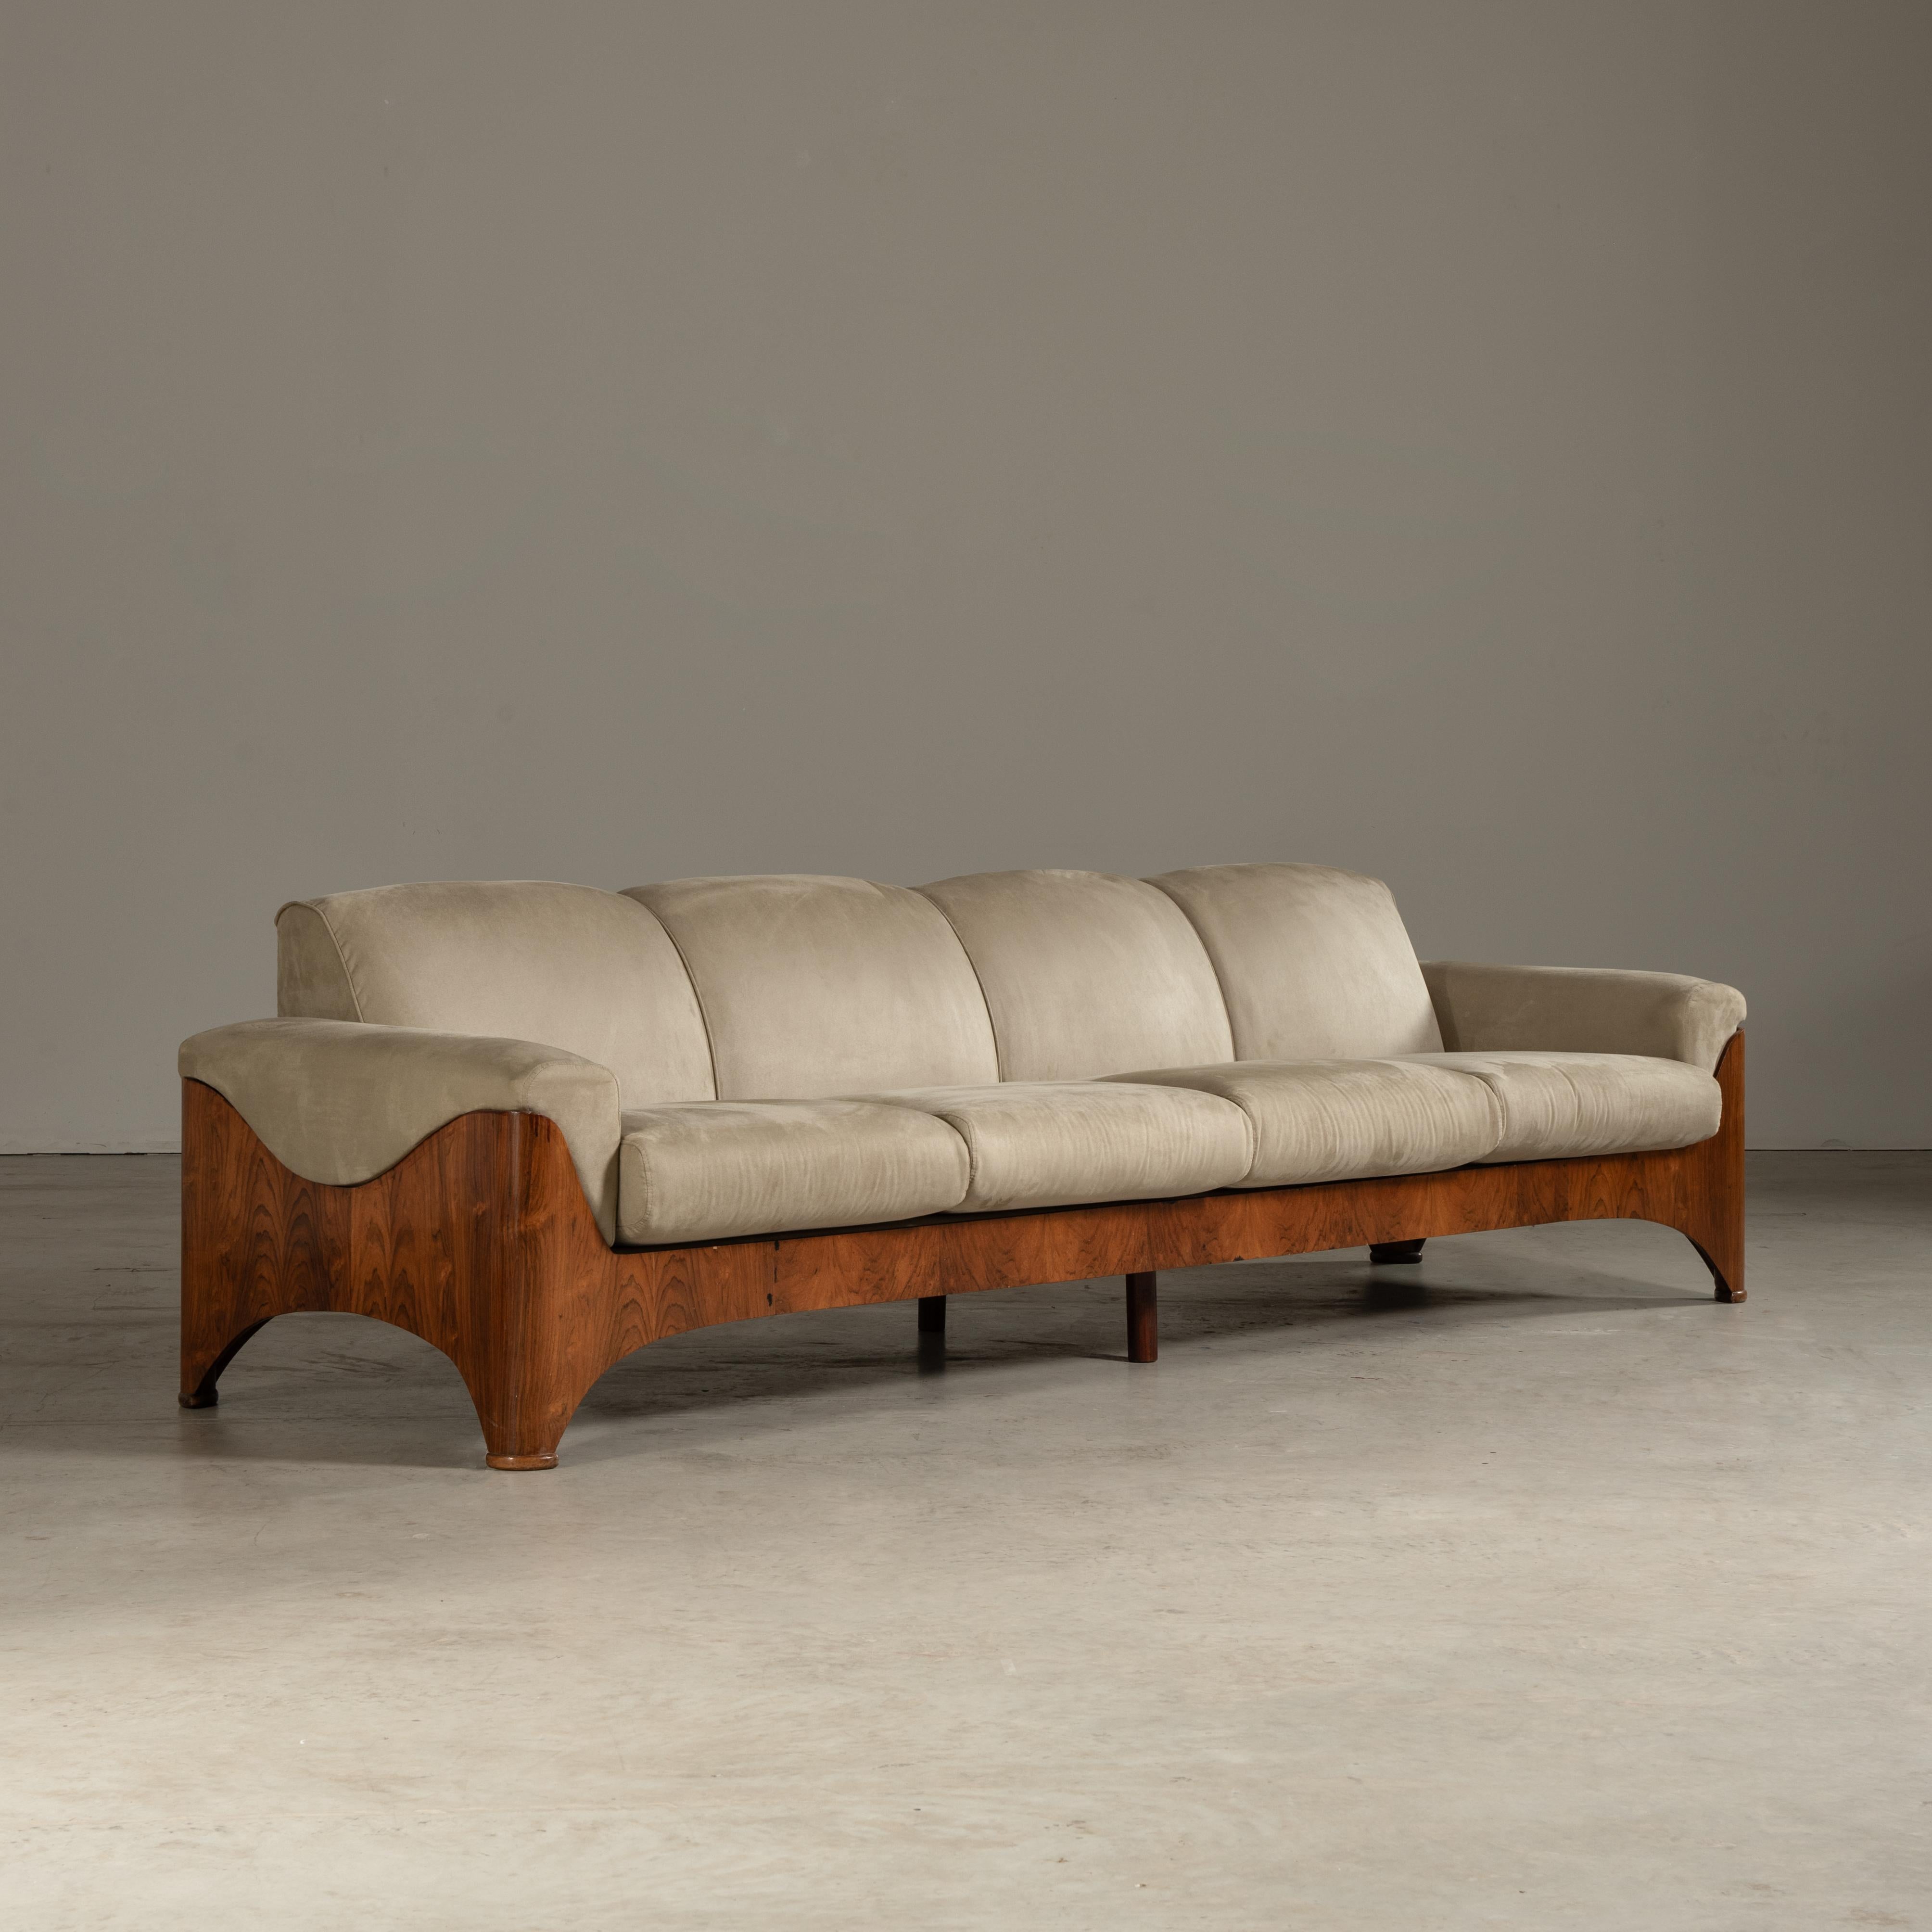 The sofa presented in the images exudes the sophistication and nuanced design of the Brazilian mid-century modern style, prevalent in the 1960s. While the designer remains unknown, the piece itself speaks volumes about the era's attention to detail